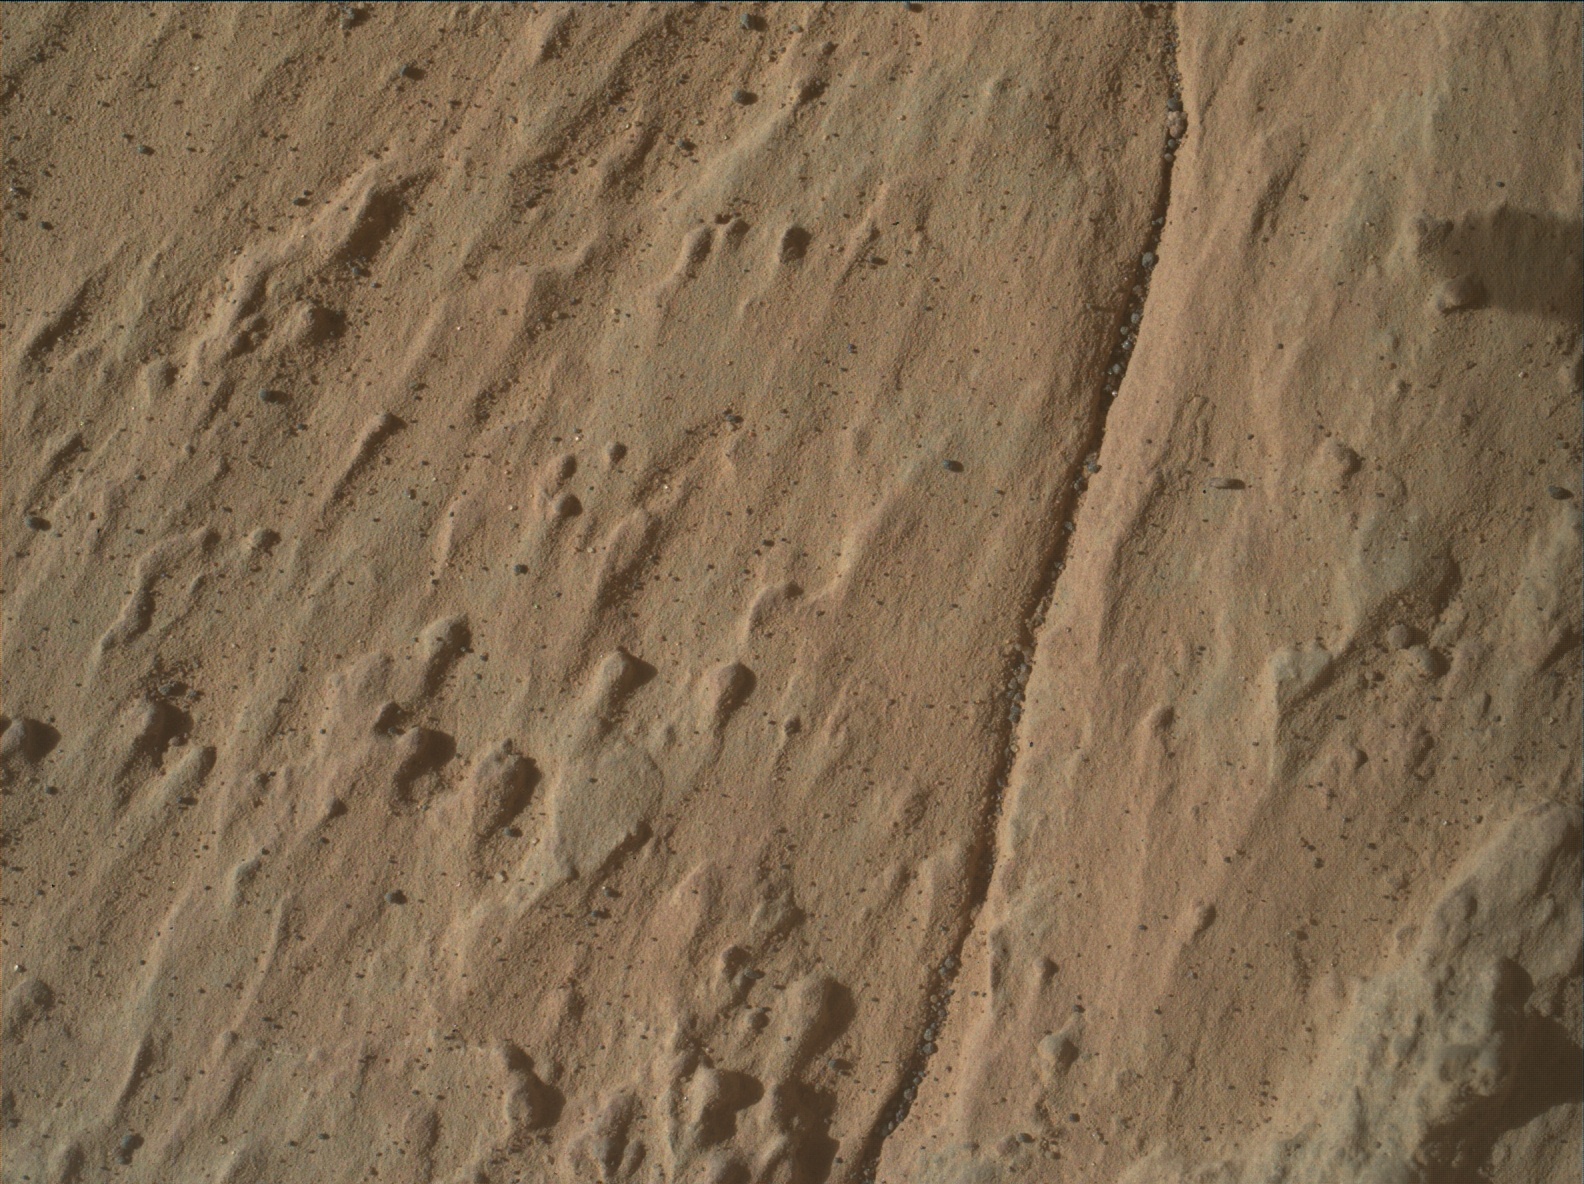 Nasa's Mars rover Curiosity acquired this image using its Mars Hand Lens Imager (MAHLI) on Sol 3147